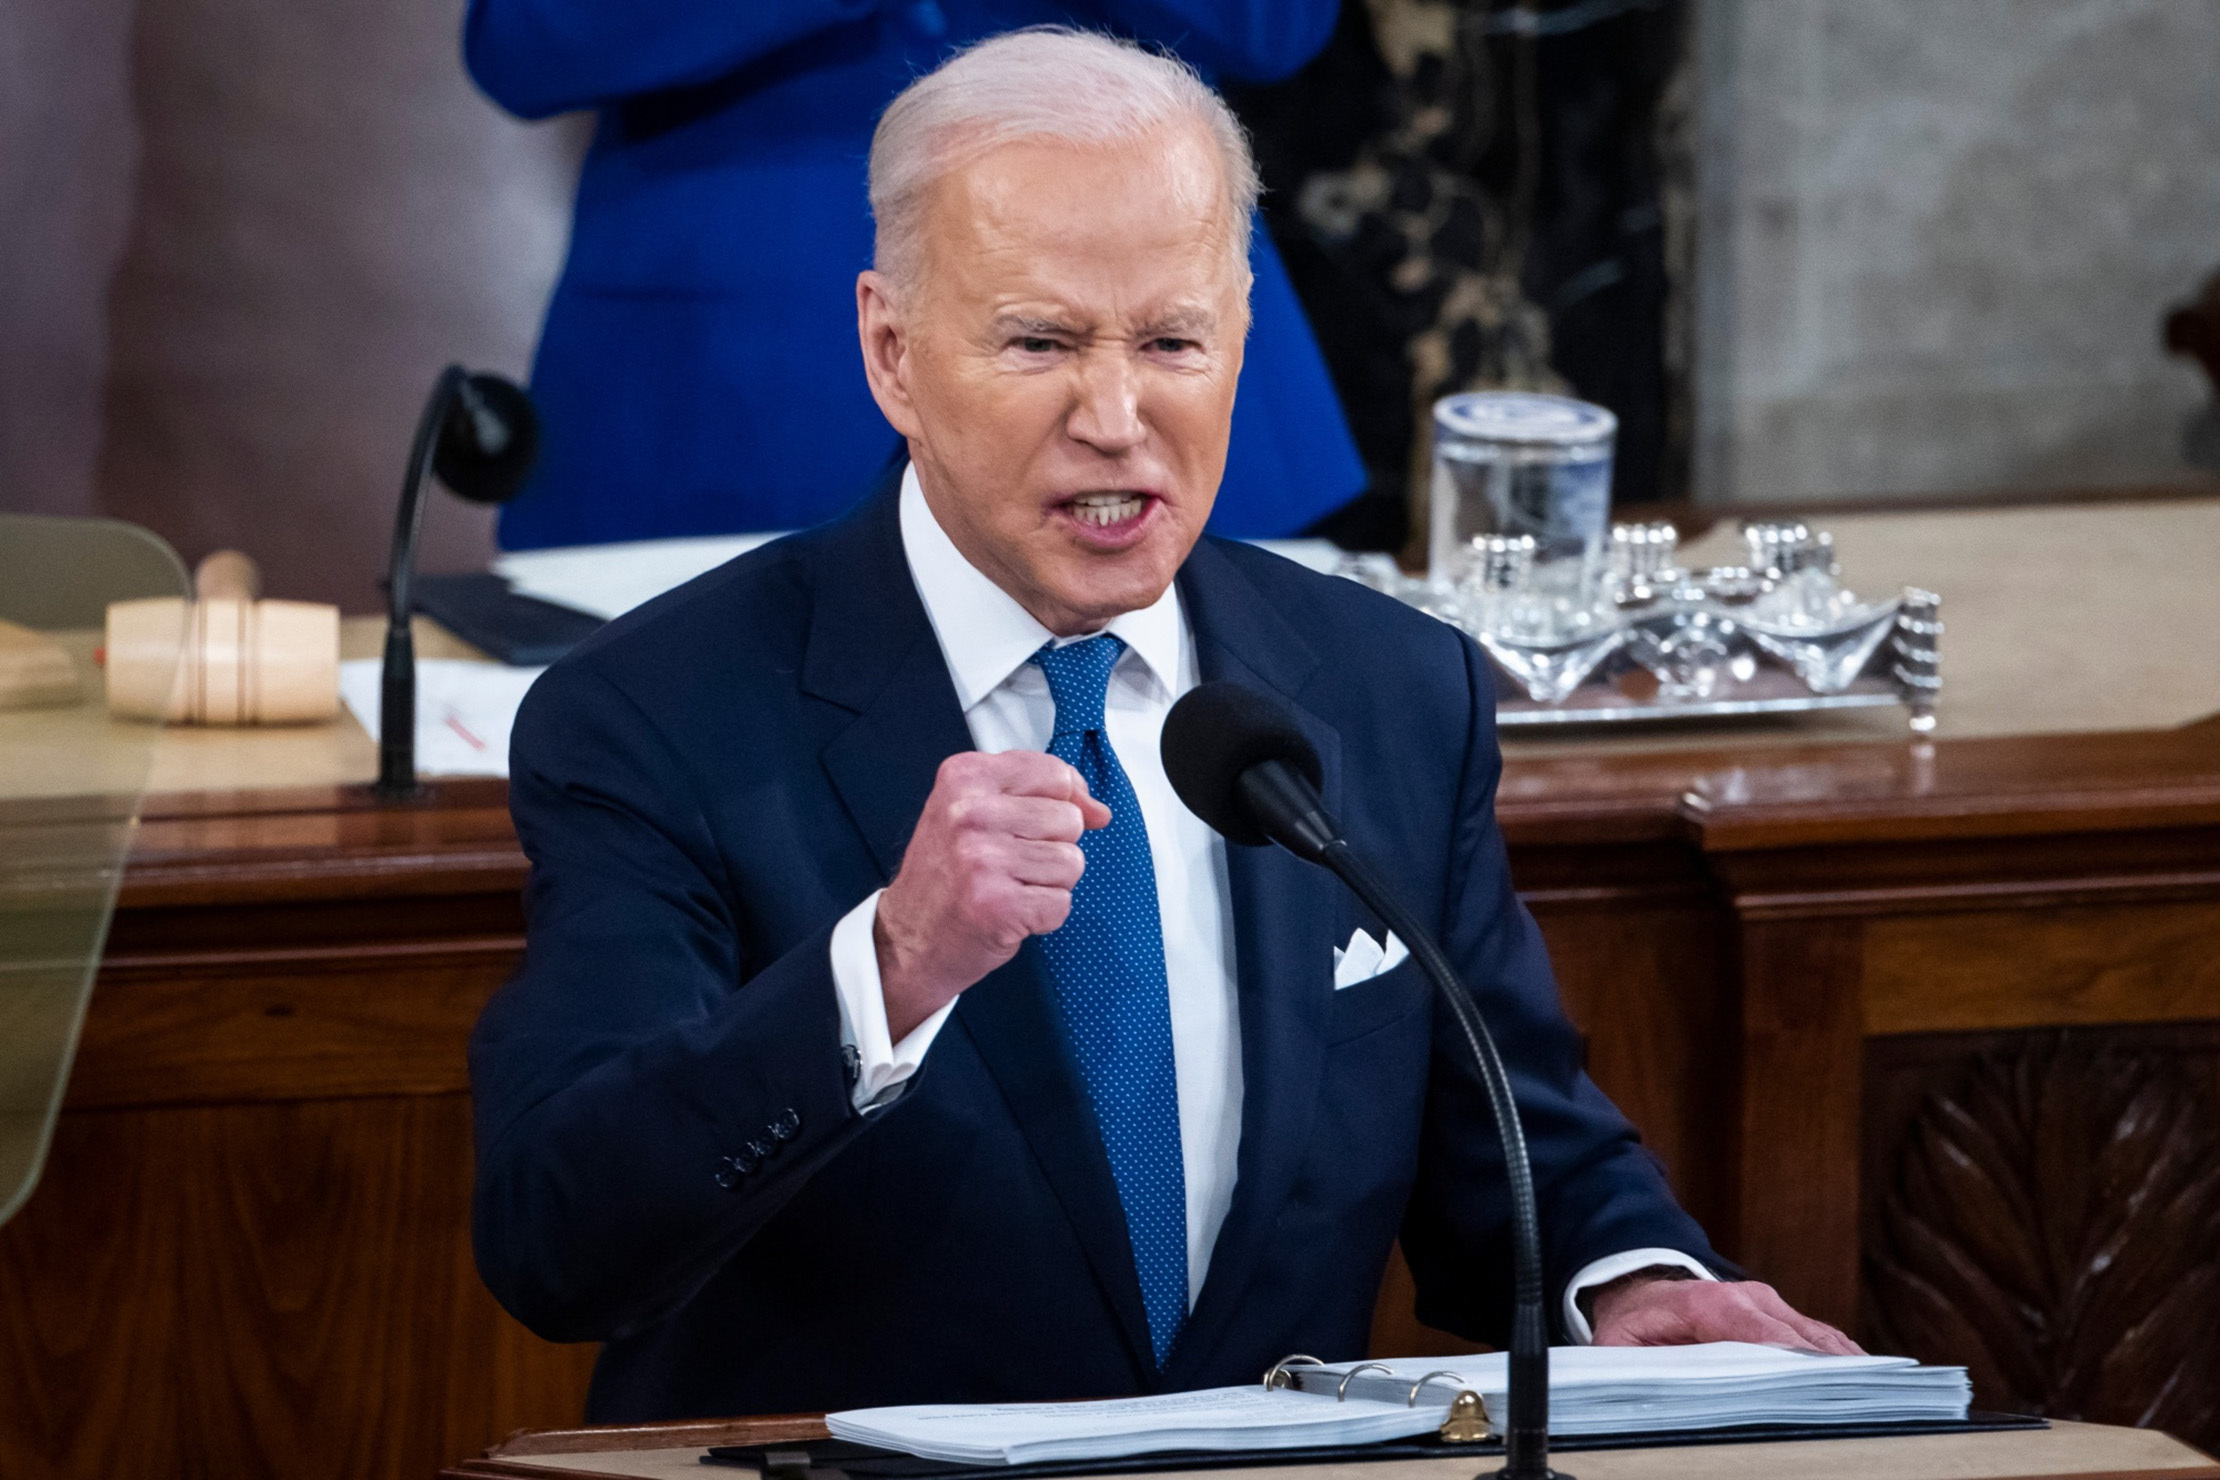 President Joe Biden delivers the&nbsp;State of the Union address at the U.S. Capitol in Washington&nbsp;on March 1.&nbsp;